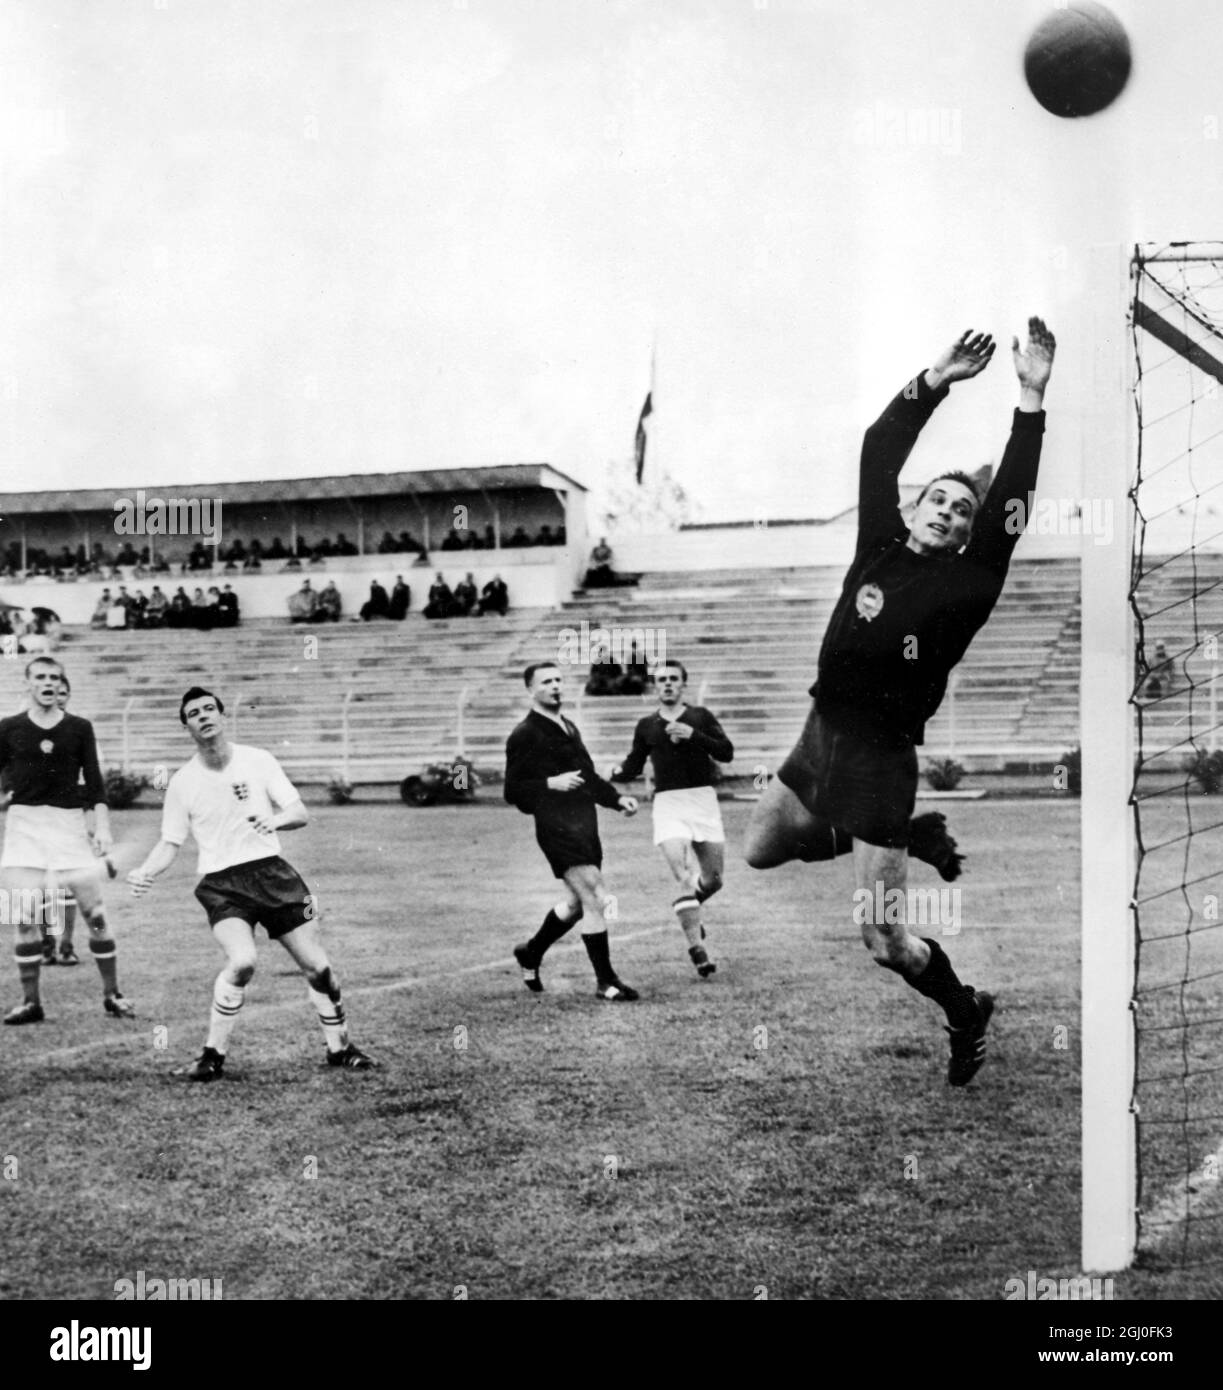 1962 World Cup England v Hungary England's Johnny Haynes watches as the Hungary goalkeeper jumps up to save the ball during the World Cup group match in Rancagua, Chile. 31st May 1962. Stock Photo